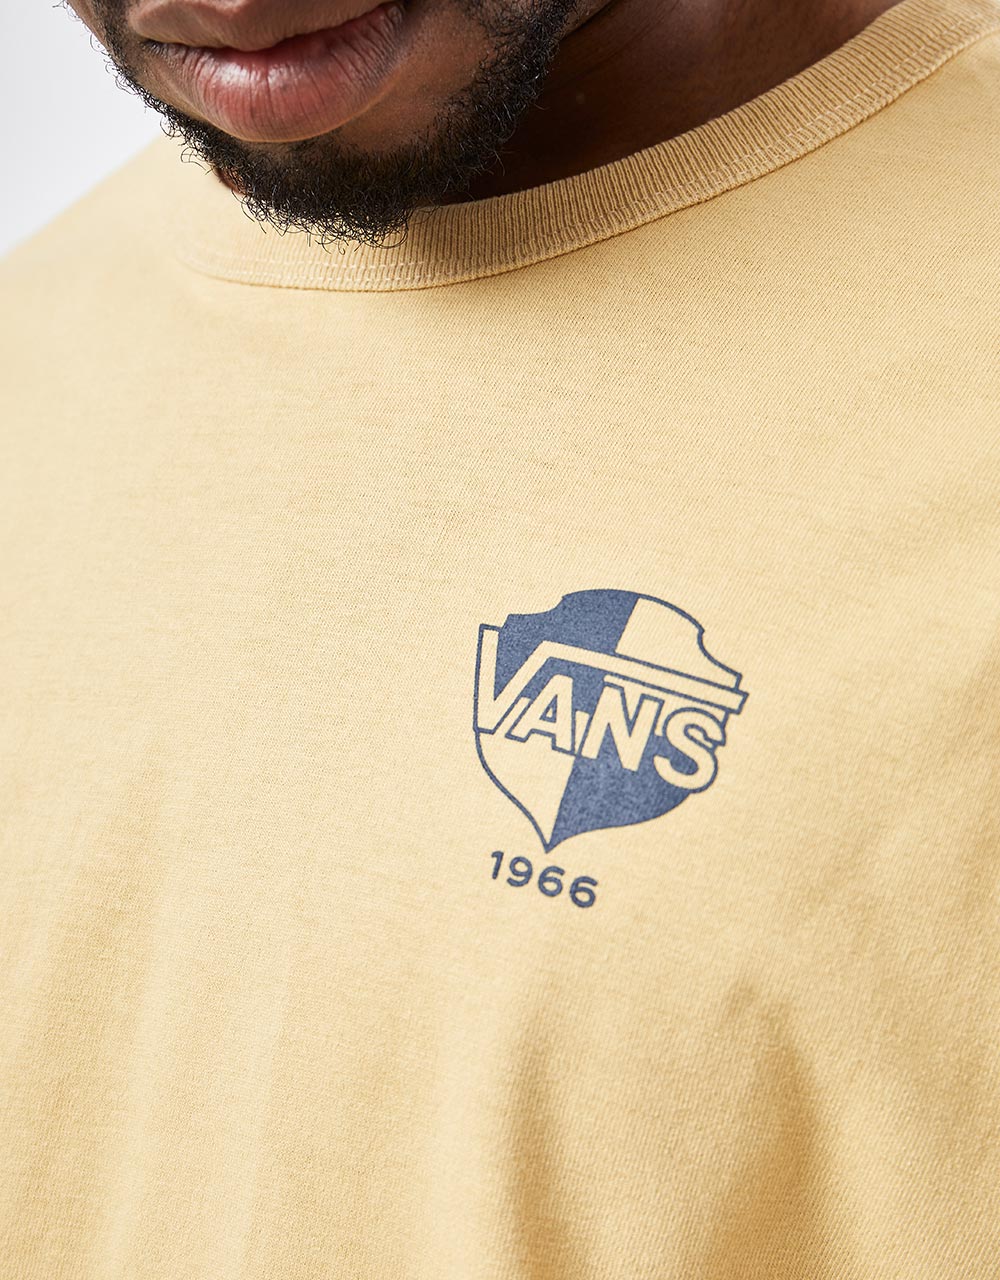 Vans Off The Wall Drop V DNA T-Shirt - Taos Taupe